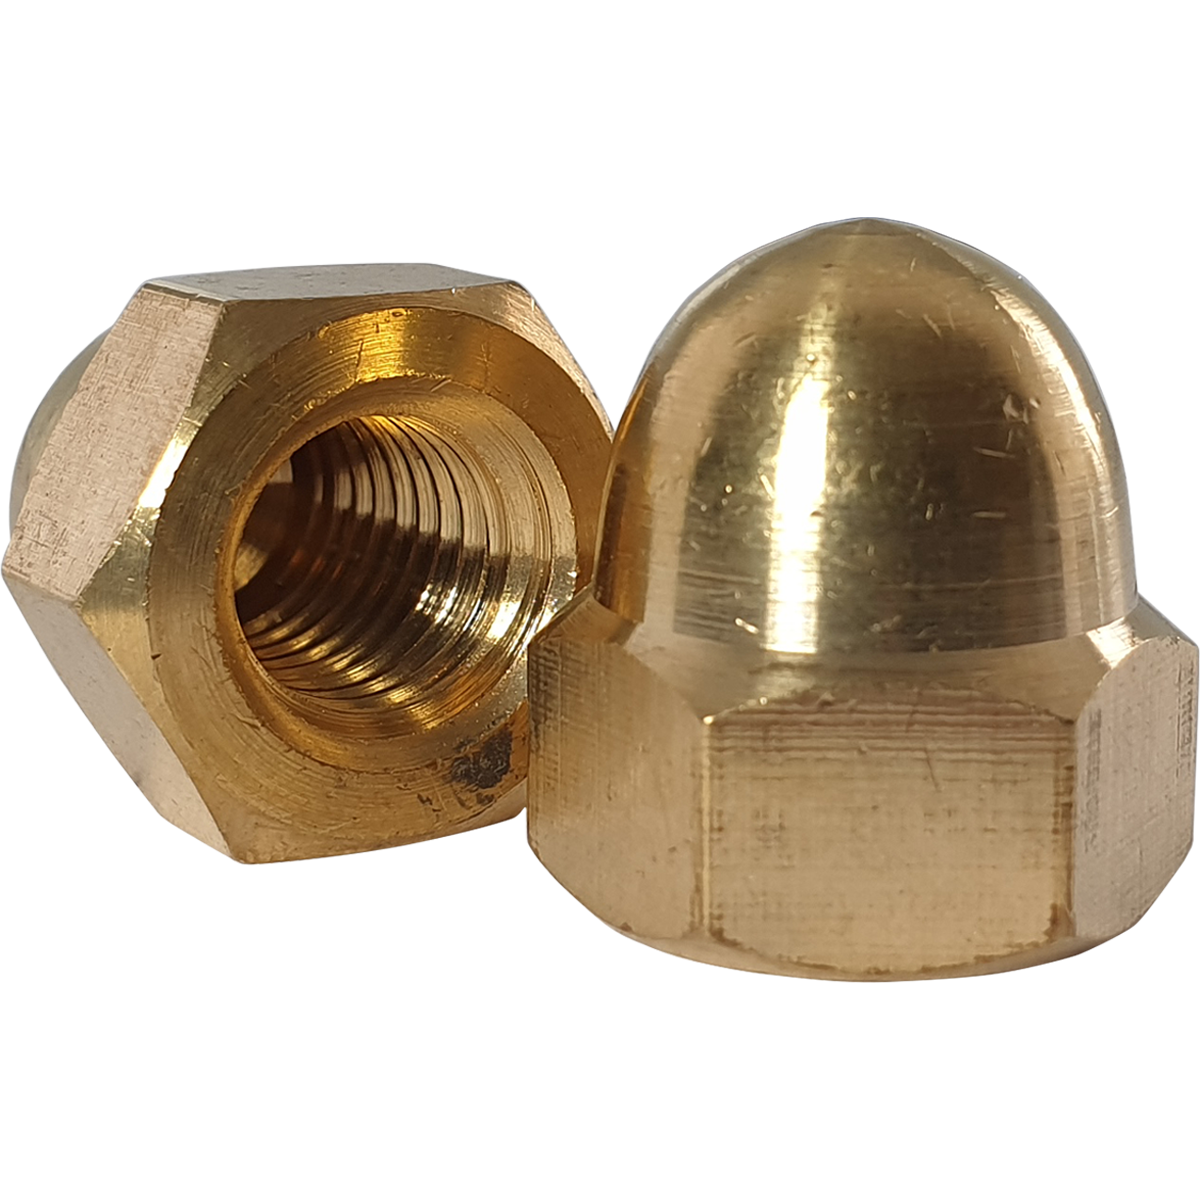 Brass dome head nuts with a hexagonal base and rounded side for use on threaded ends for an aesthetic finish. 